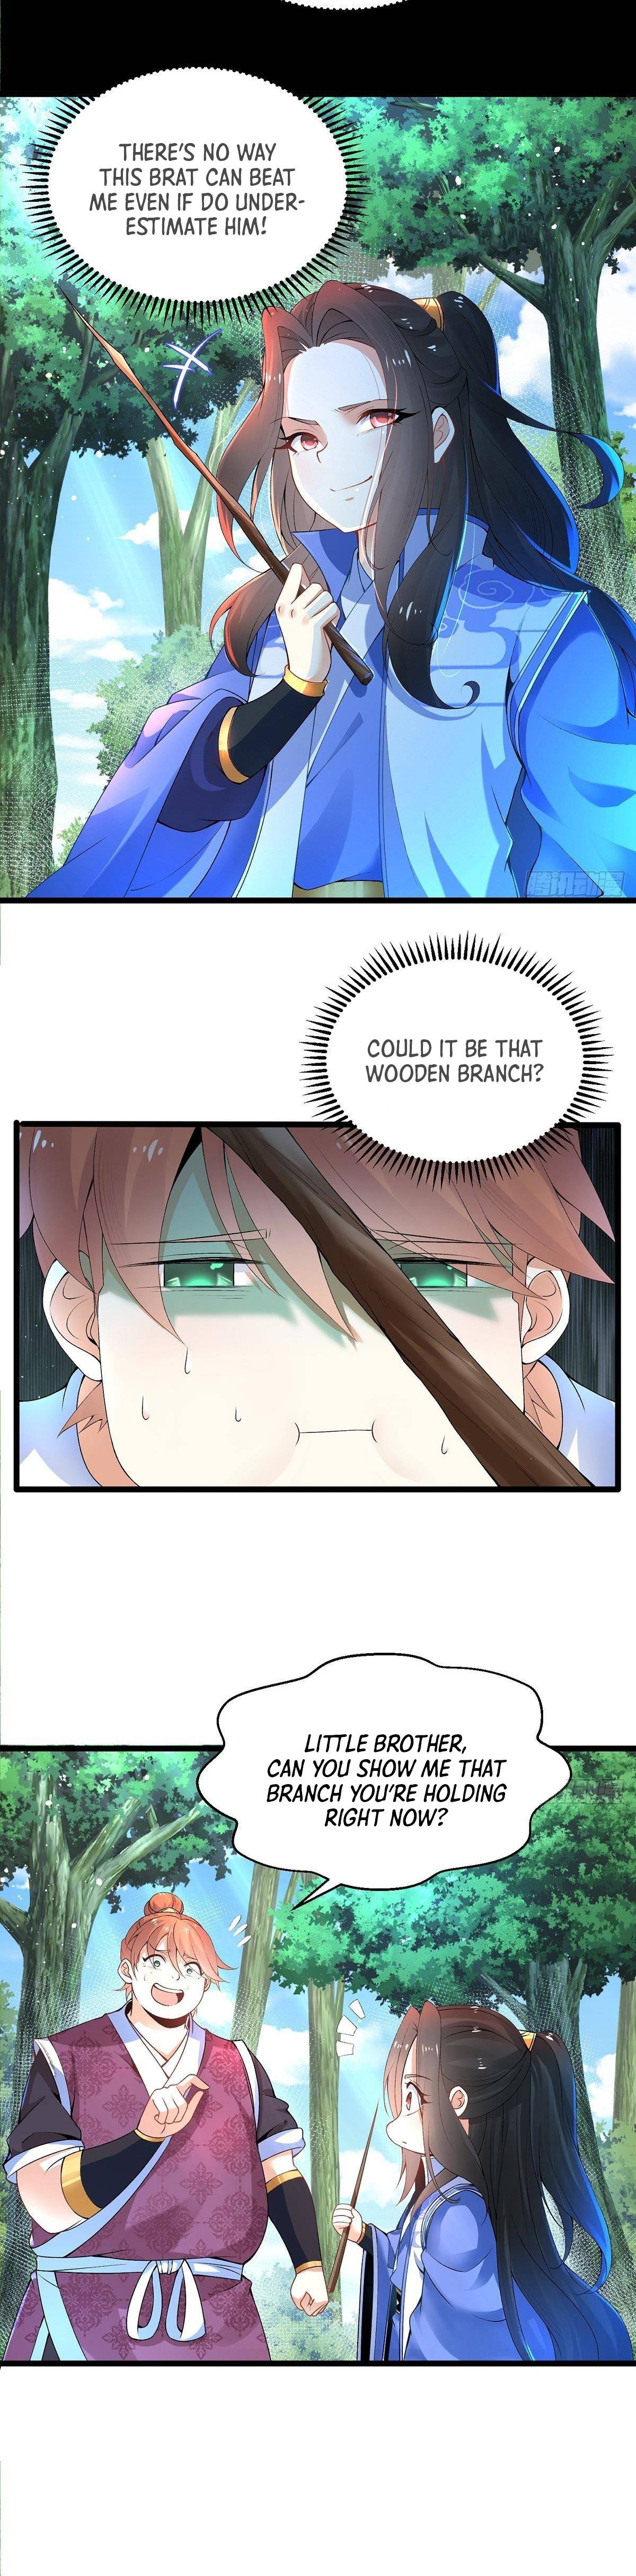 Chaotic Sword God (Remake) Chapter 5 - Page 3